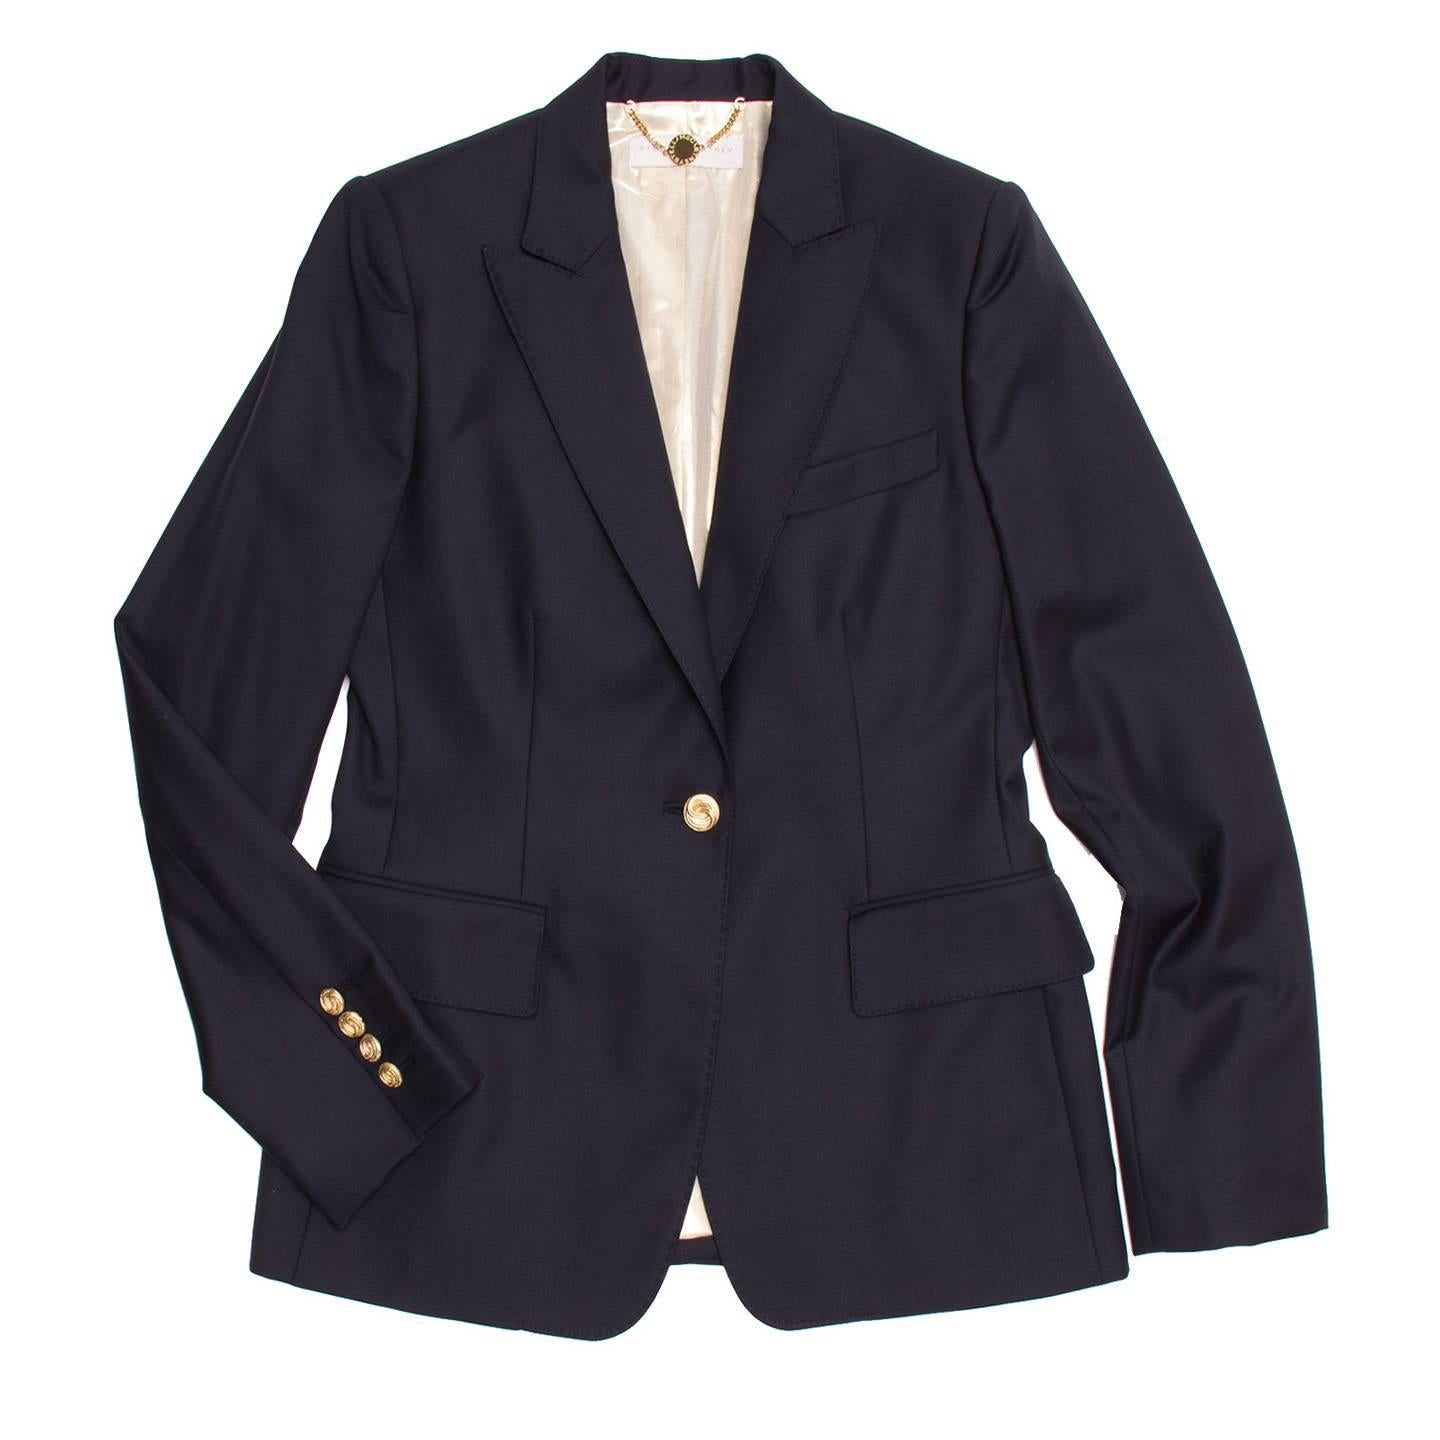 Navy wool single button tailored blazer. Gold buttons at front opening and at back of cuffs. 2 flap pockets at front and handkerchief pocket at chest. Pick stitching detail around the lapels. Vent at center back bottom. Chain hanger loop with logo